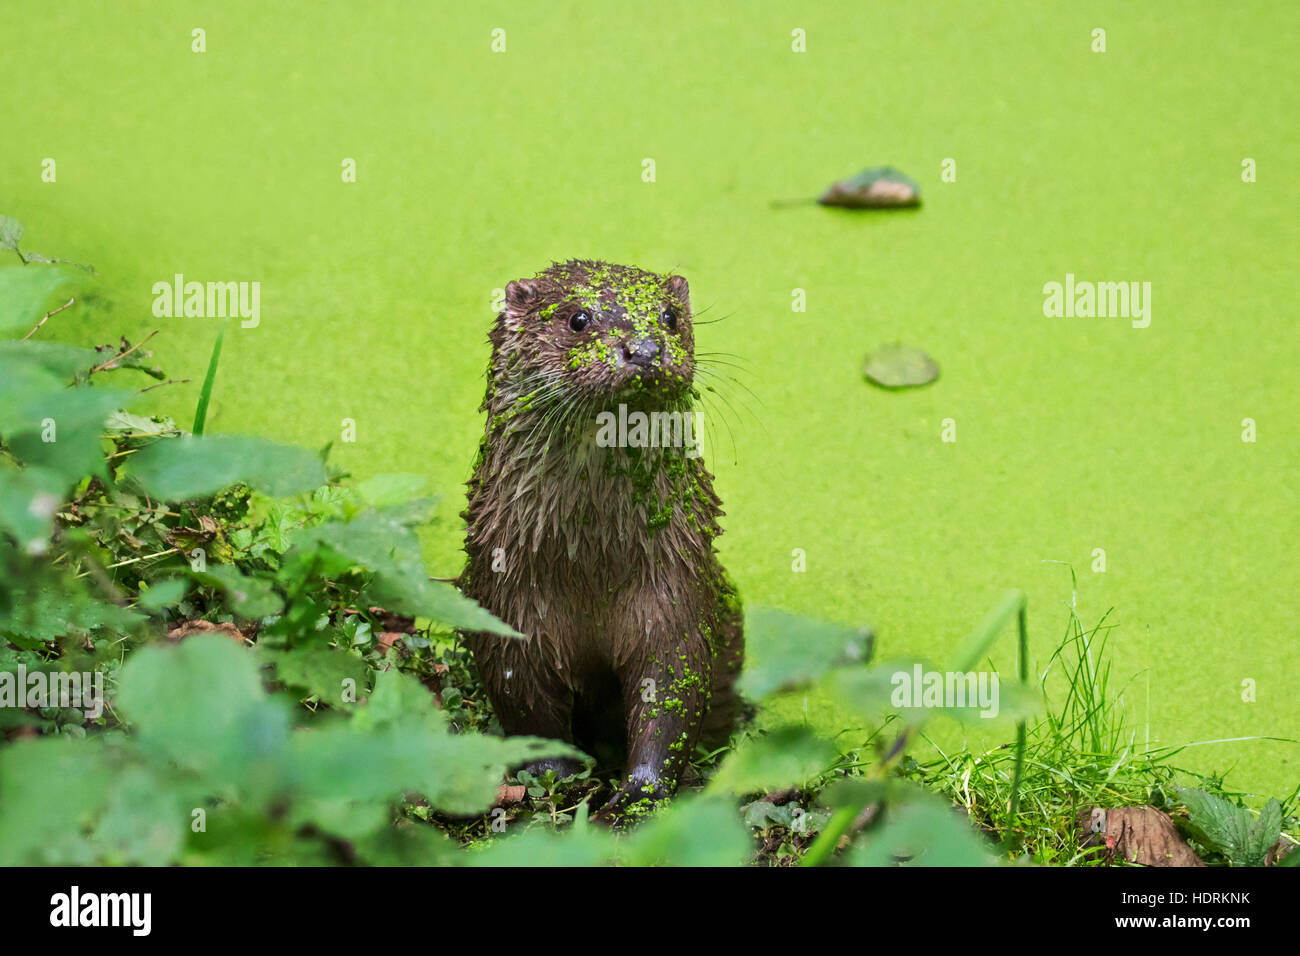 European River Otter (Lutra lutra) in pond covered in duckweed Stock Photo